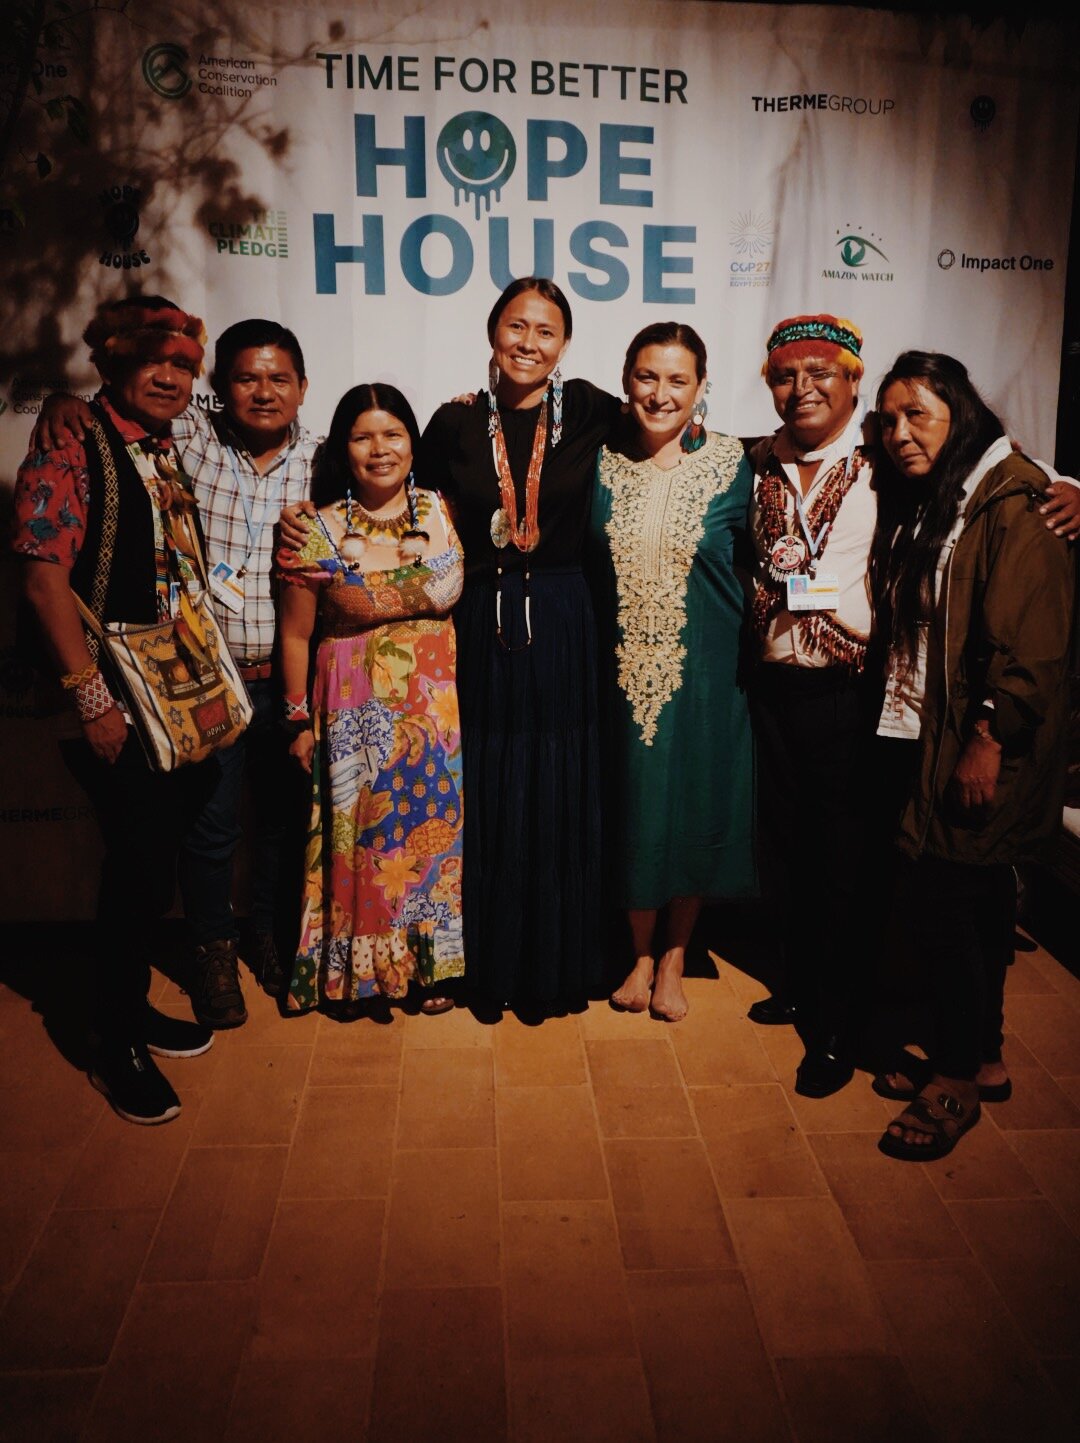 Leaders from Cultural Survival and Amazon Watch stand together with former WEA International Advisory Council member Wahleah Johns, Director of the U.S. Dept. of Energy, at a Hope House event. Credit: Bertold Weisner